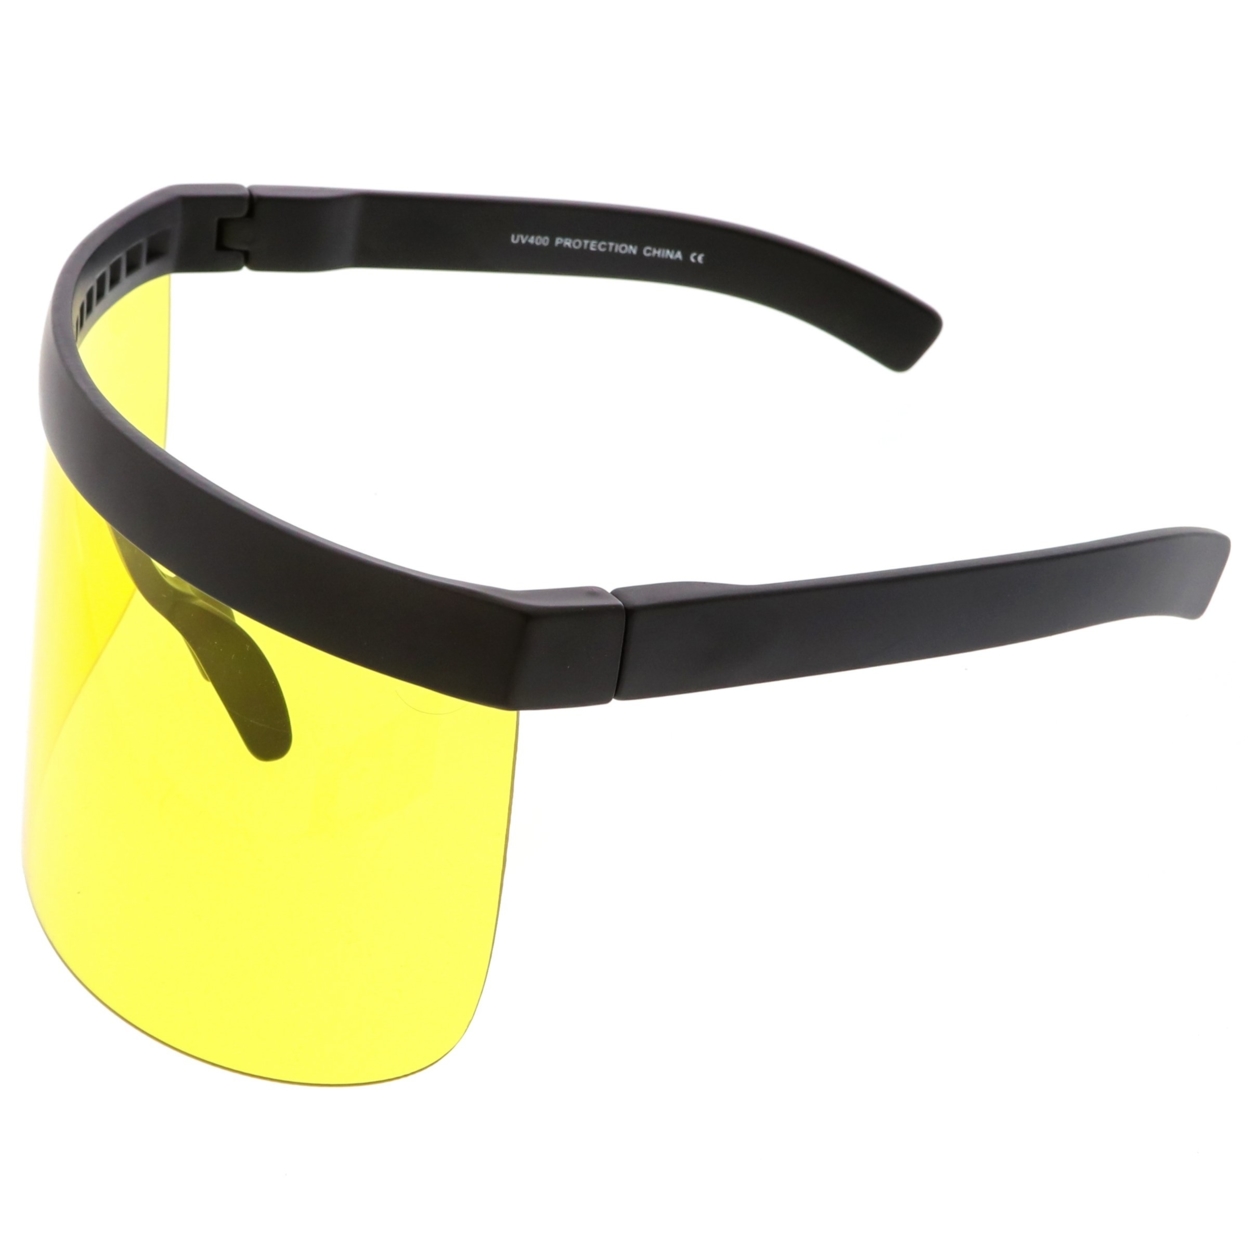 Futuristic Oversize Shield Visor Sunglasses With Flat Top Colored Mono Lens 172mm - Red